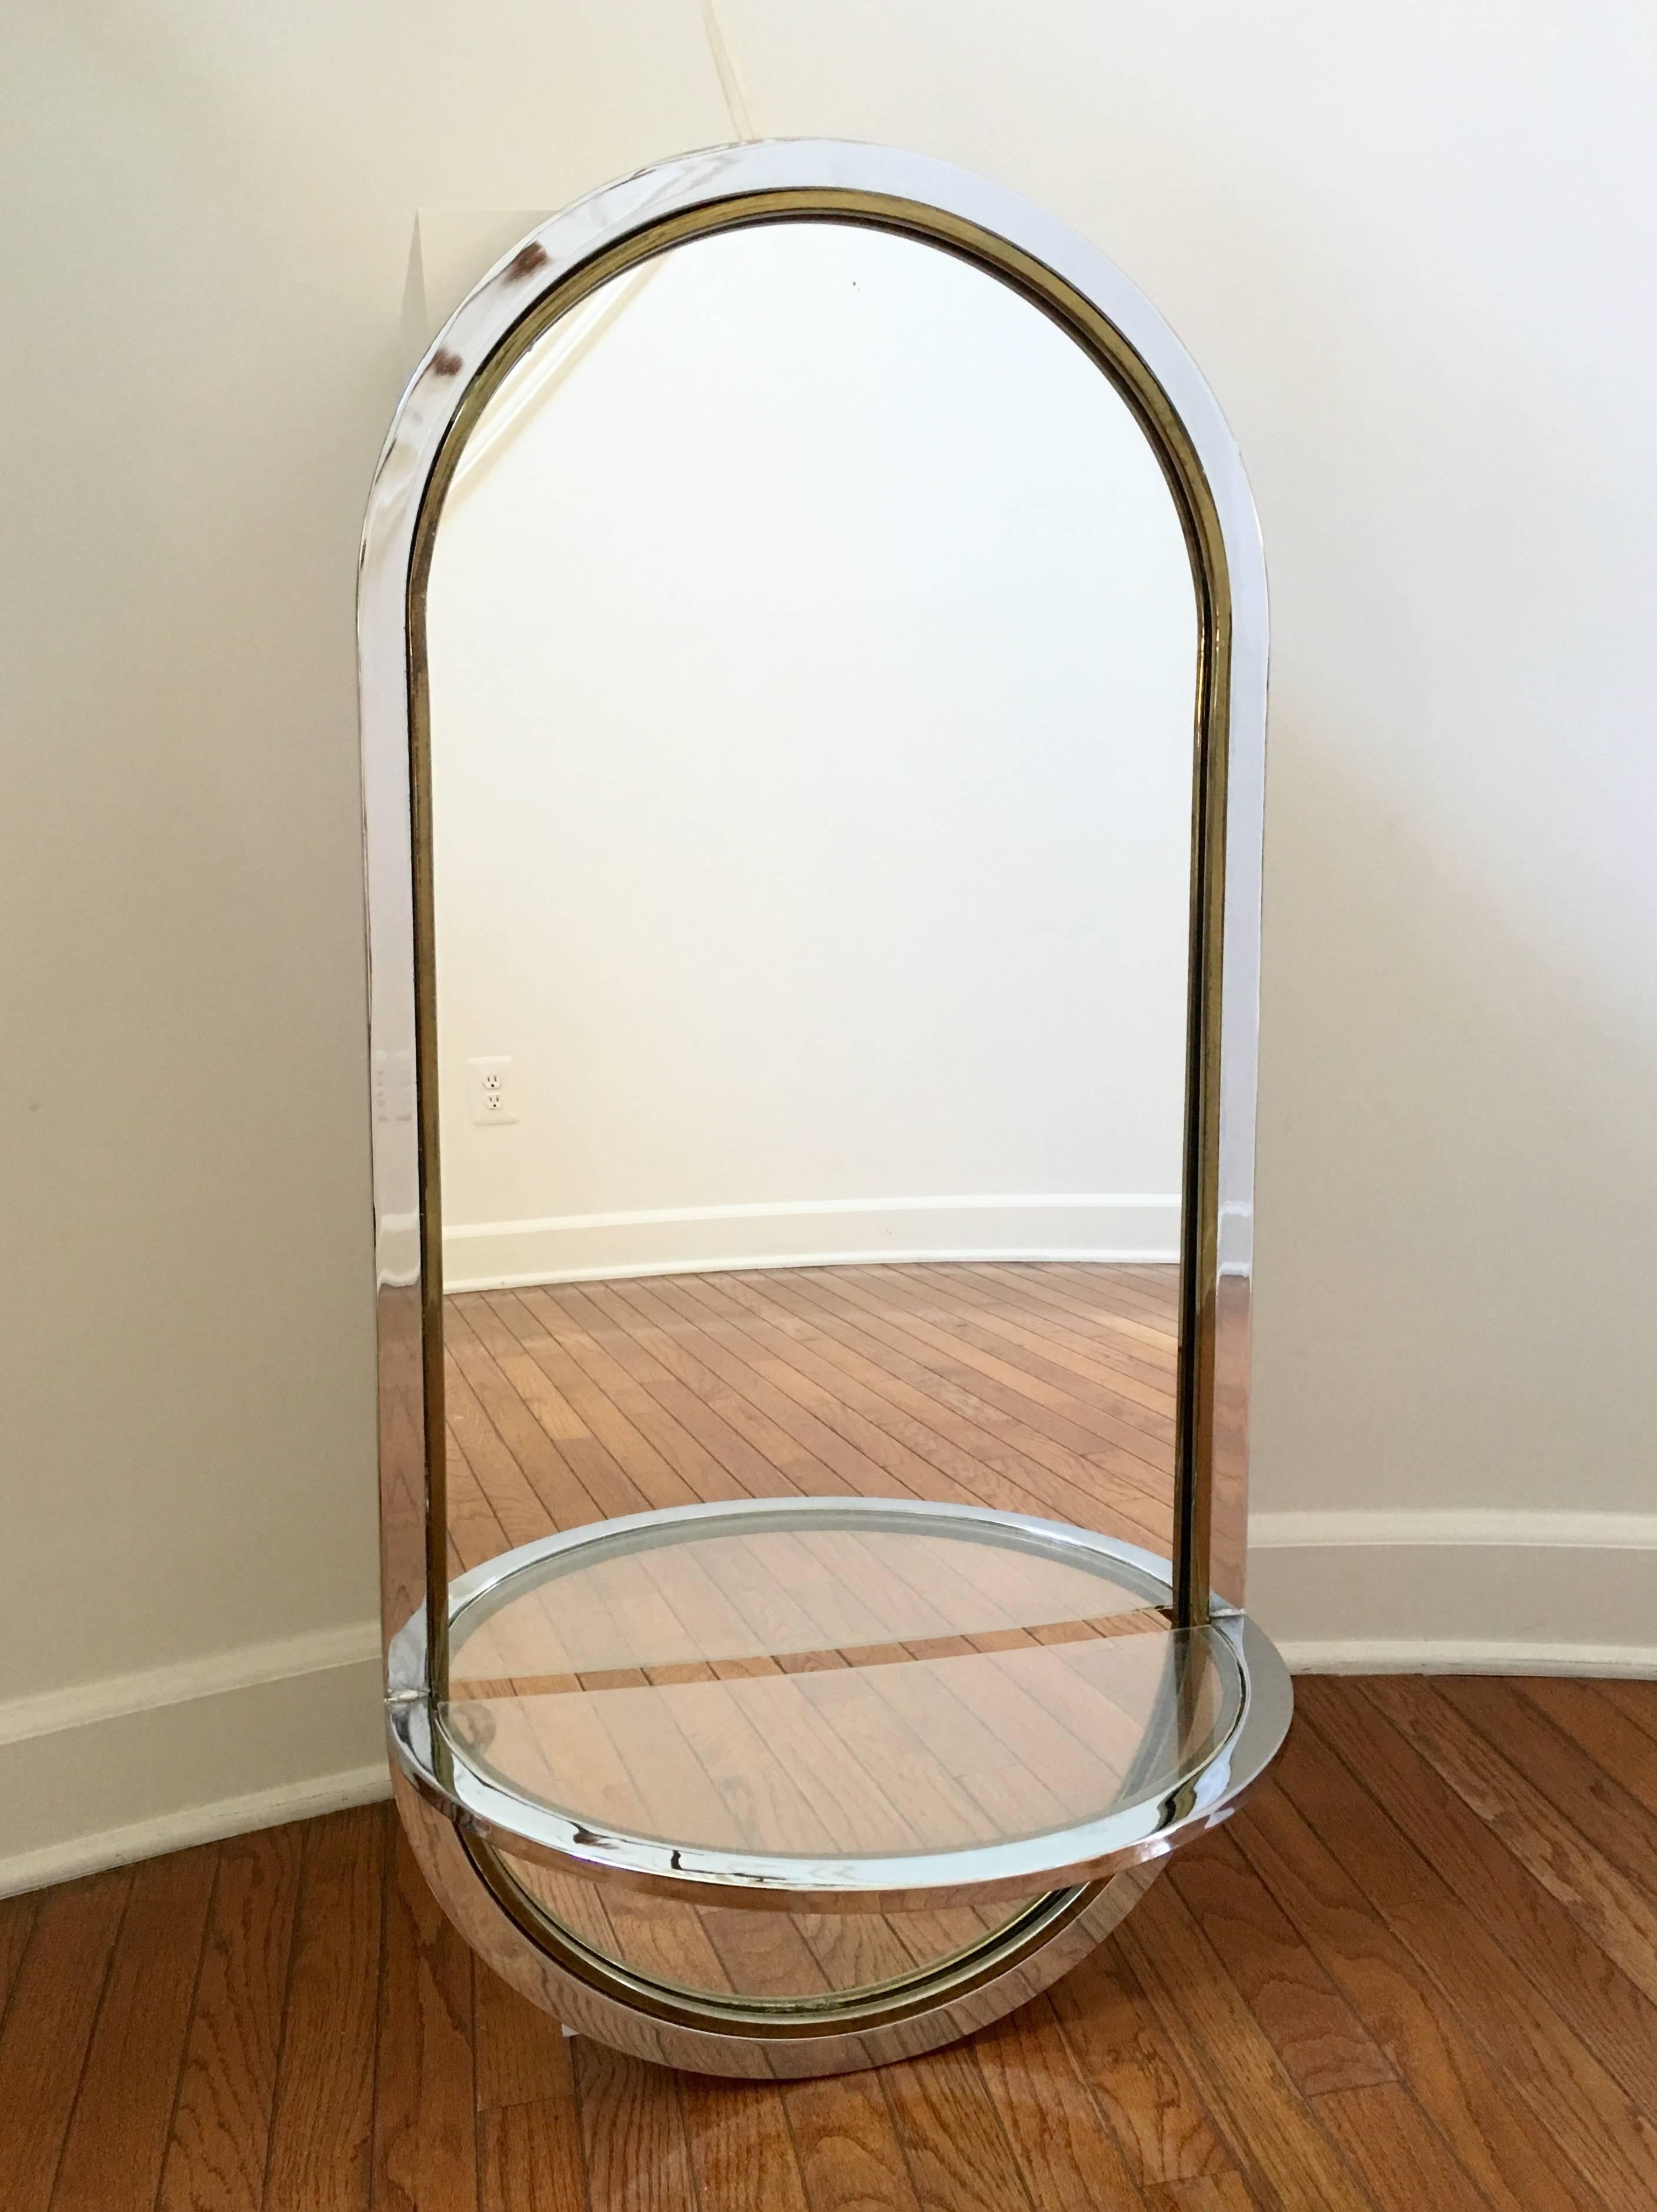 Chrome, Brass and Lucite Oval Mirror In Good Condition For Sale In Ashburn, VA